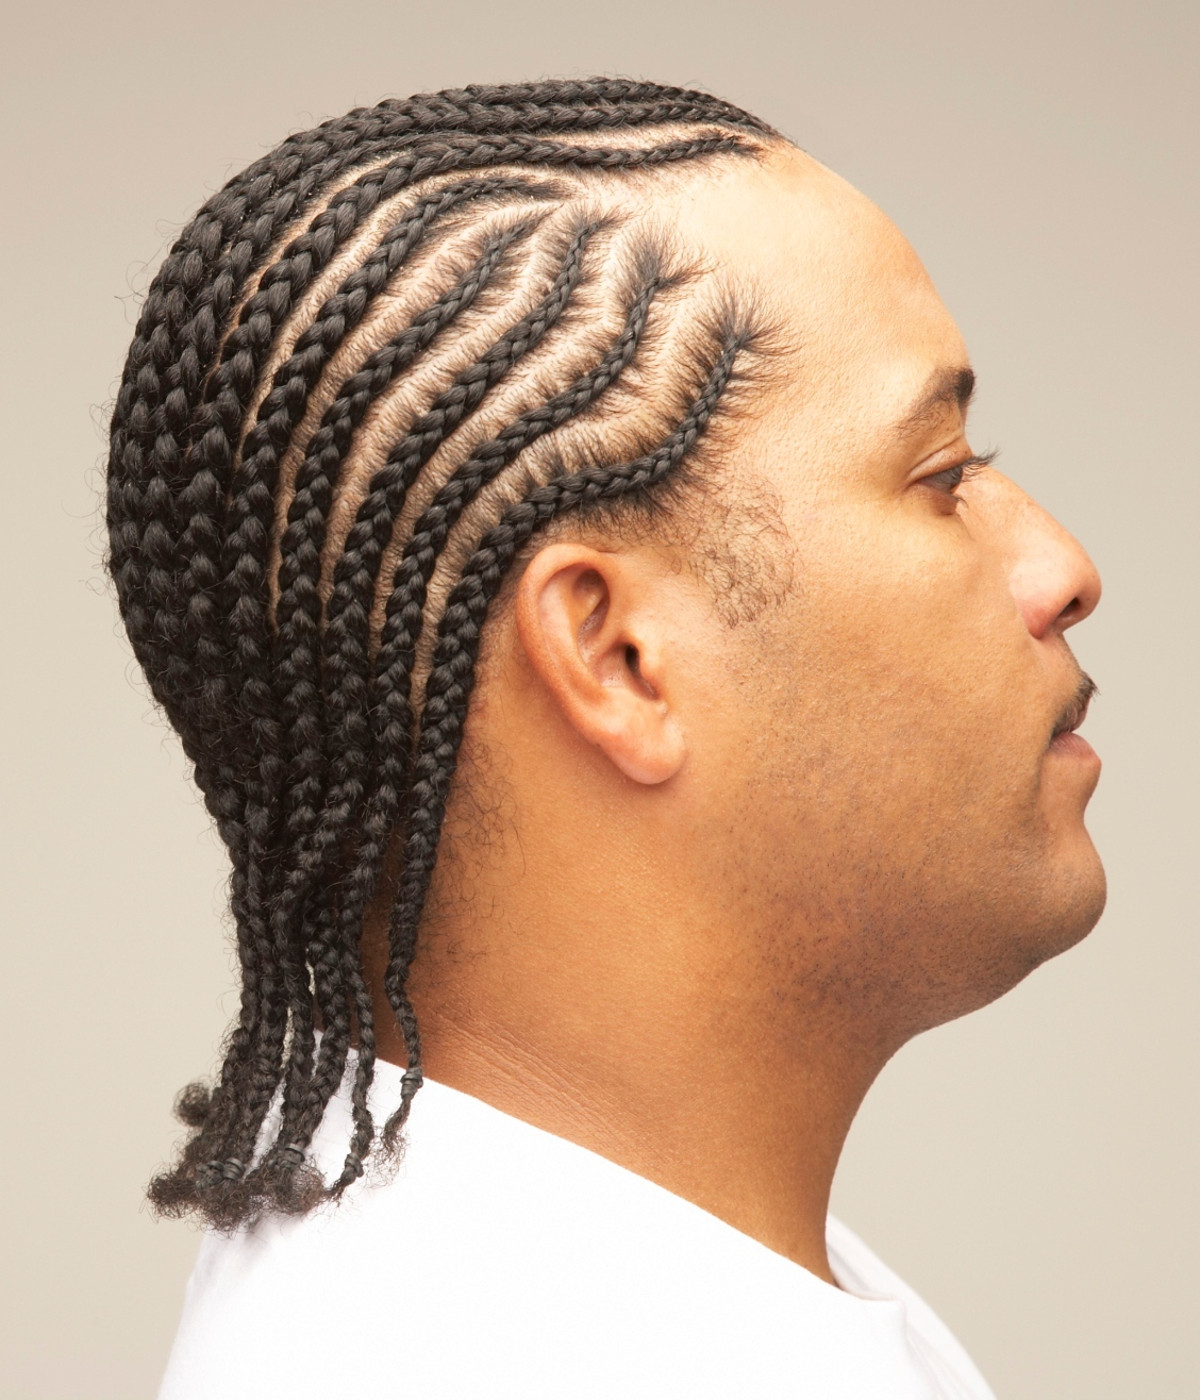 Mens Braids Hairstyles
 Braided Hairstyles for Men That Will Catch Everyone s Eye